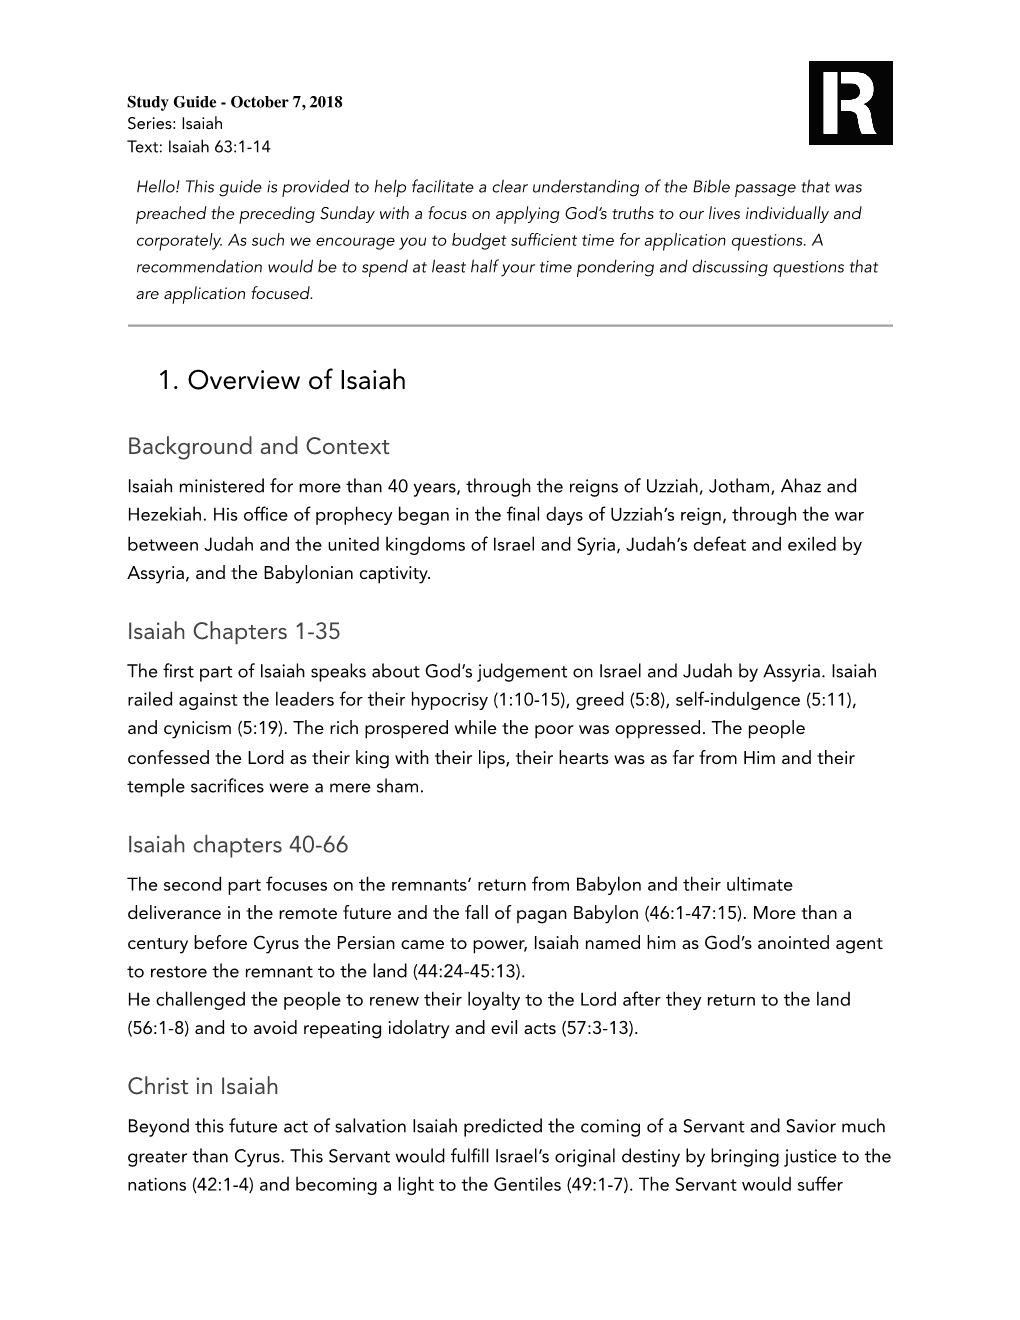 1. Overview of Isaiah